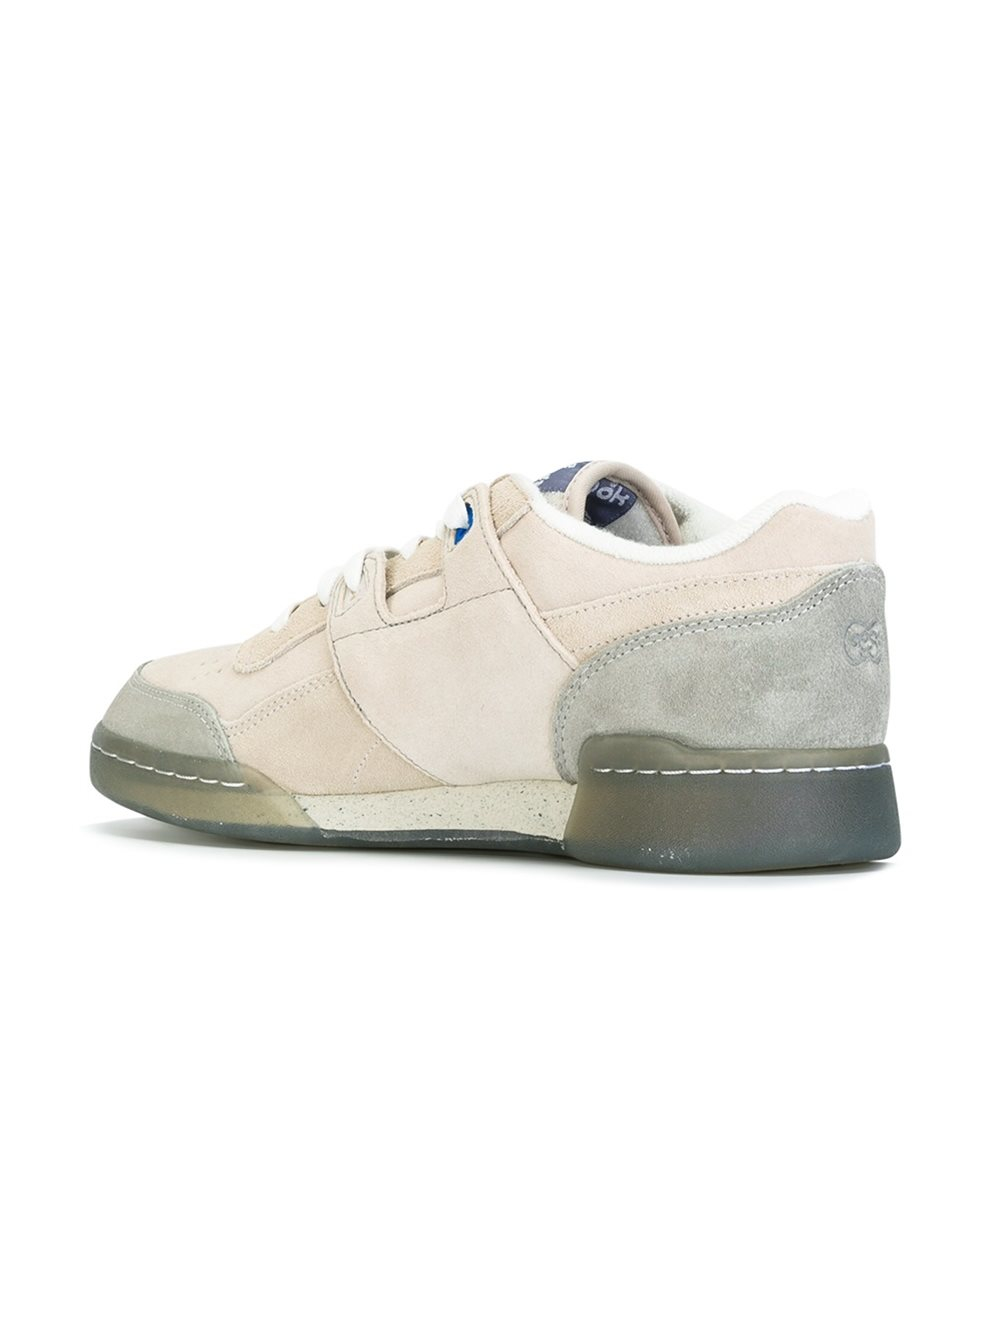 Reebok Cotton Chunky Sole Sneakers in White for Men - Lyst